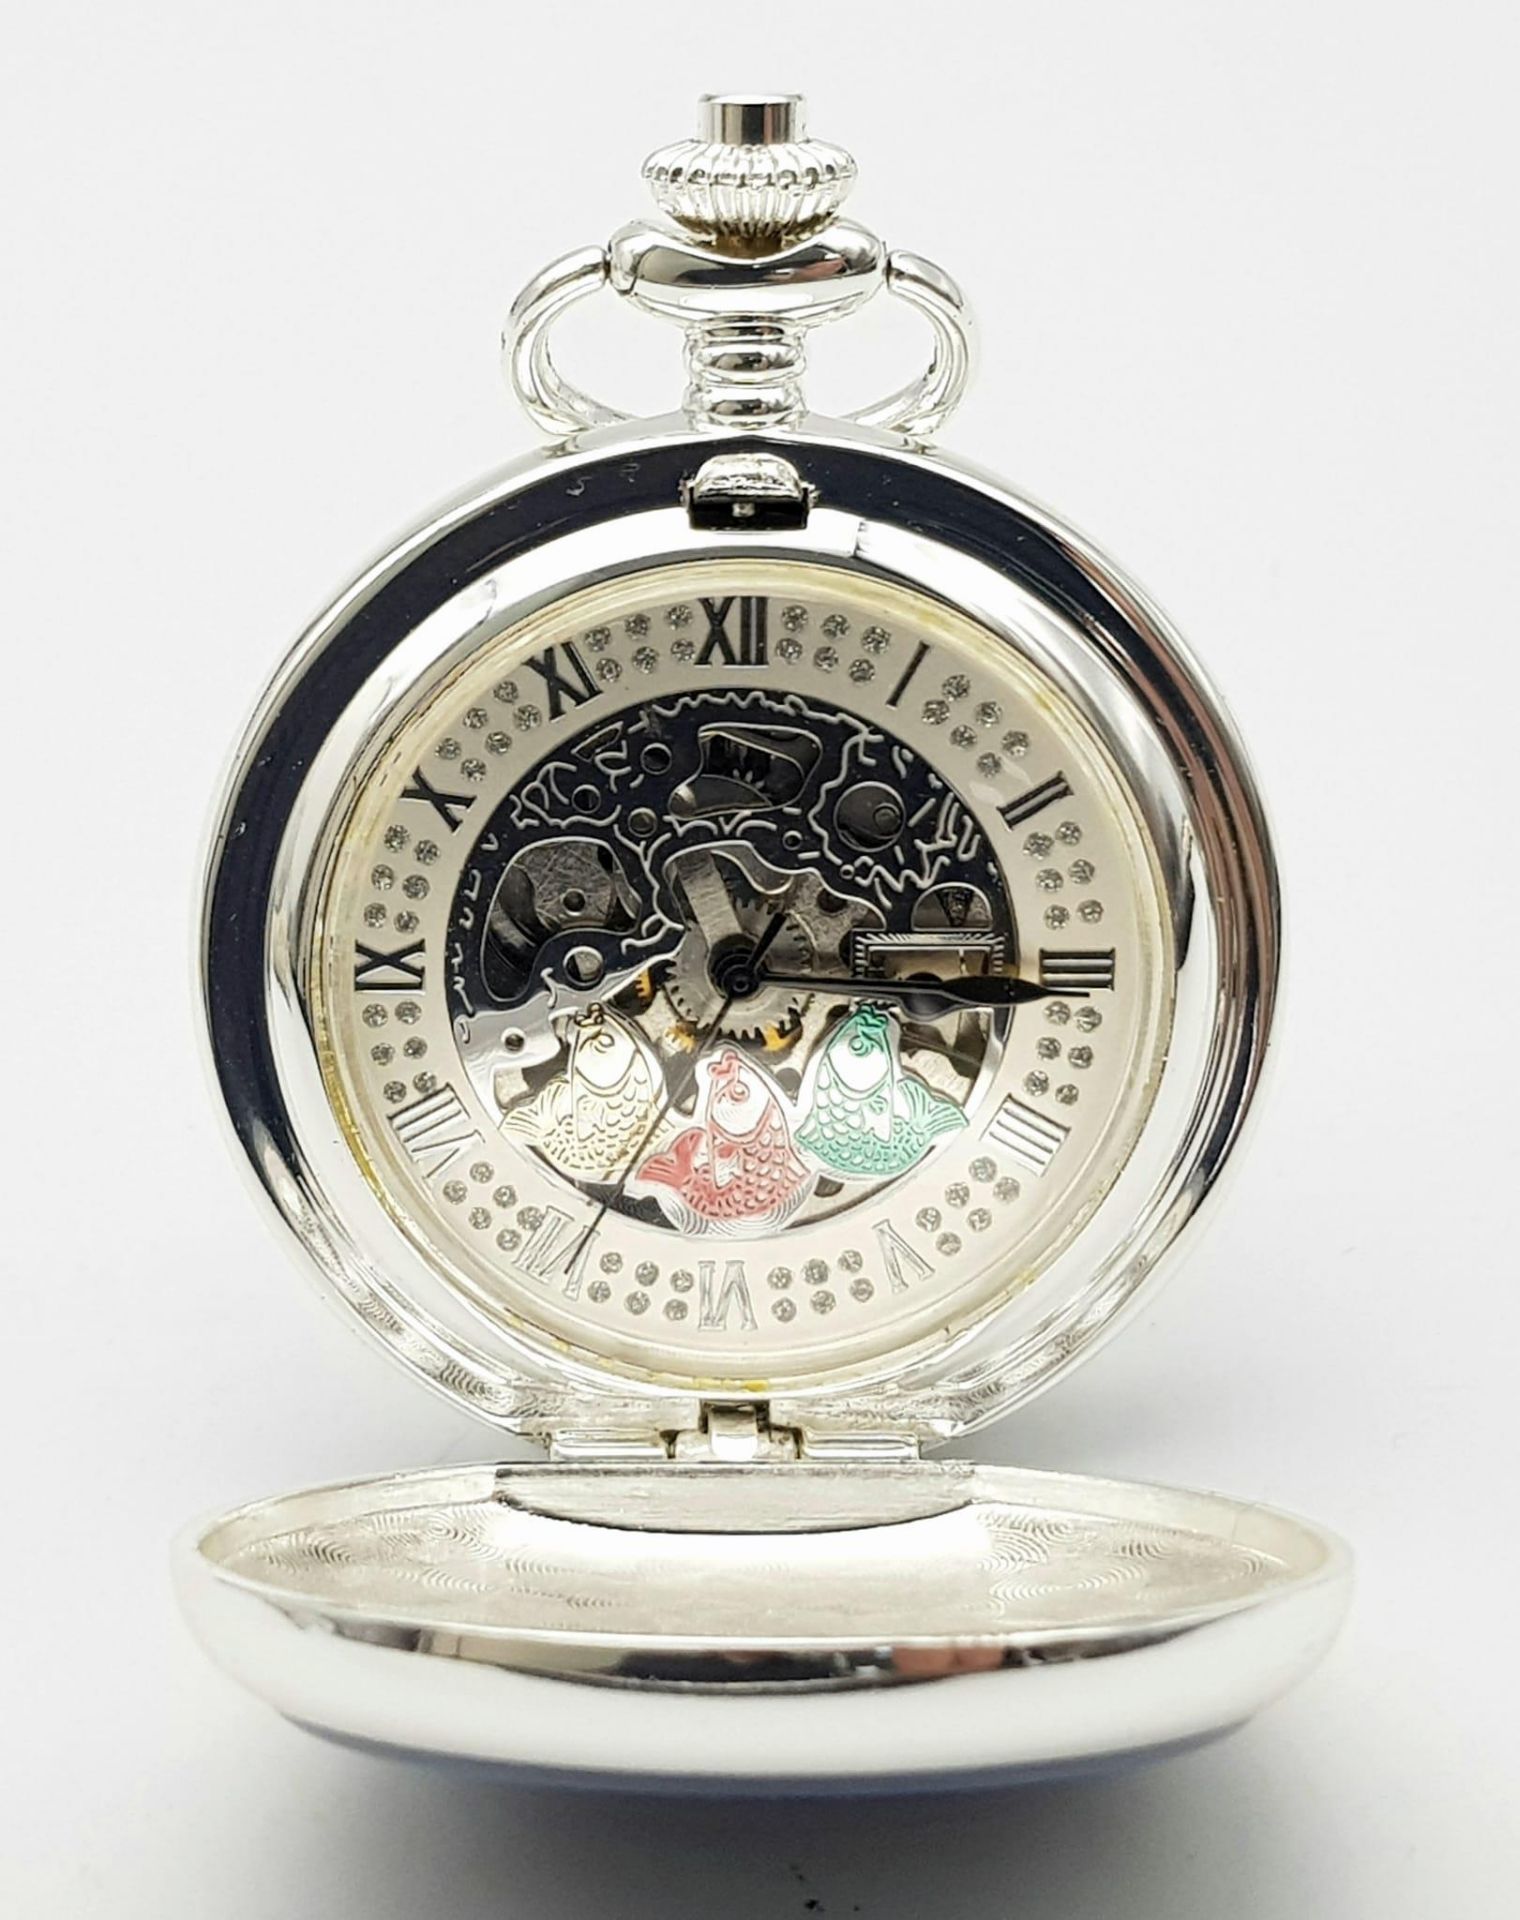 A Manual Wind Silver Plated Pocket Watch Detailing the Famous Steam Train ‘City of Truro’. The First - Bild 4 aus 10